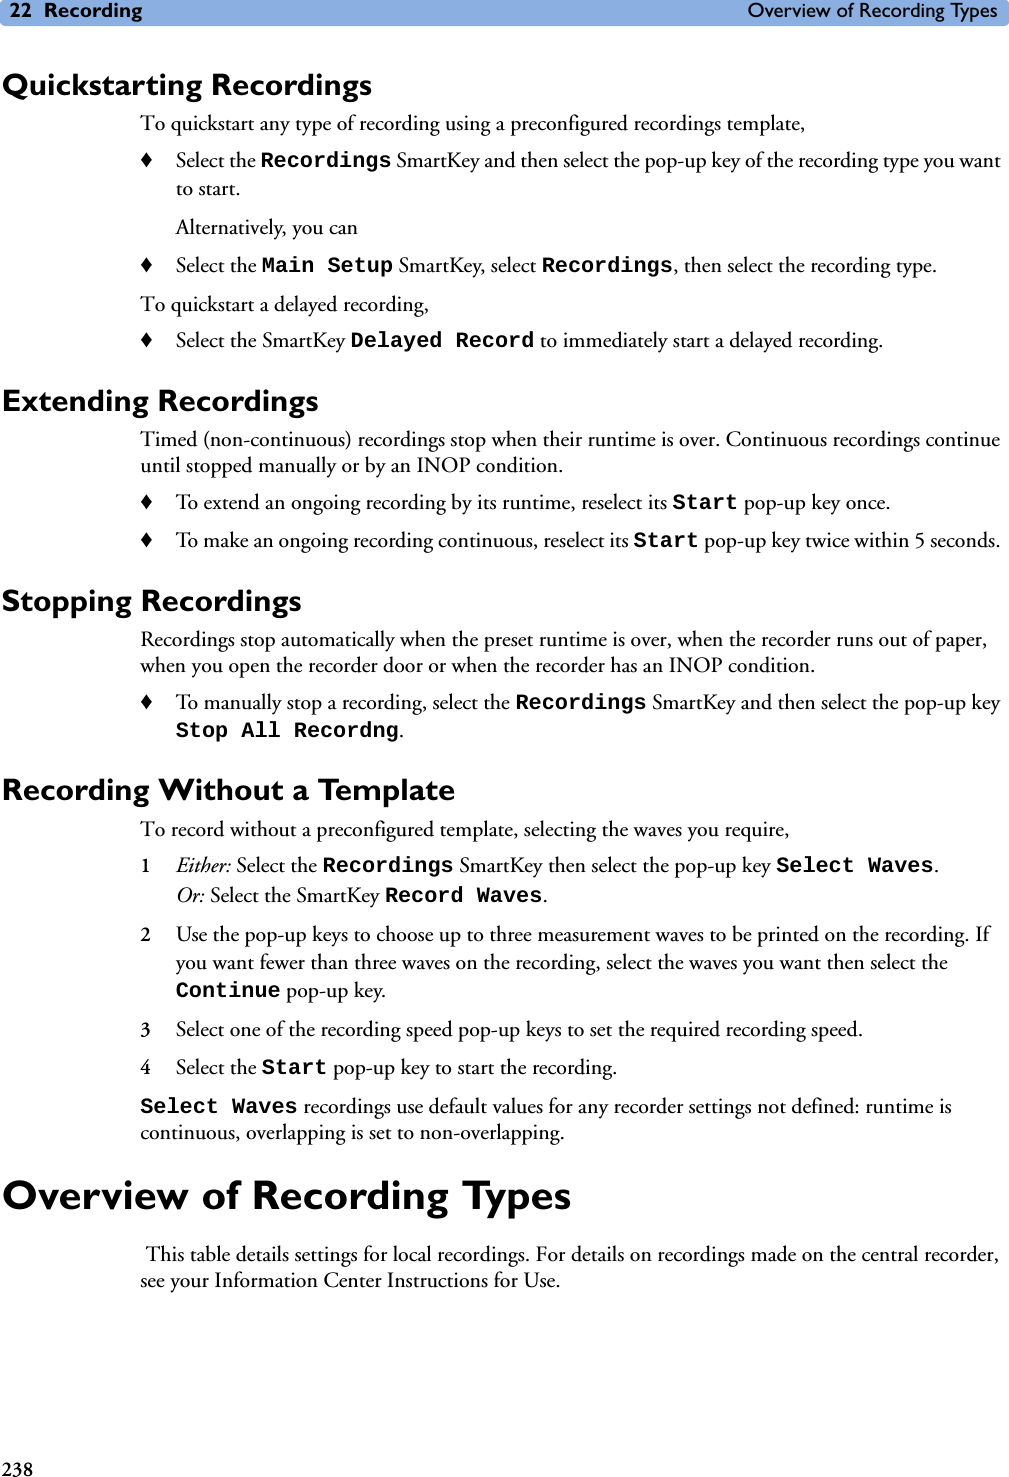 22 Recording Overview of Recording Types238Quickstarting RecordingsTo quickstart any type of recording using a preconfigured recordings template, ♦Select the Recordings SmartKey and then select the pop-up key of the recording type you want to start. Alternatively, you can ♦Select the Main Setup SmartKey, select Recordings, then select the recording type.To quickstart a delayed recording, ♦Select the SmartKey Delayed Record to immediately start a delayed recording. Extending RecordingsTimed (non-continuous) recordings stop when their runtime is over. Continuous recordings continue until stopped manually or by an INOP condition.♦To extend an ongoing recording by its runtime, reselect its Start pop-up key once.♦To make an ongoing recording continuous, reselect its Start pop-up key twice within 5 seconds. Stopping Recordings Recordings stop automatically when the preset runtime is over, when the recorder runs out of paper, when you open the recorder door or when the recorder has an INOP condition.♦To manually stop a recording, select the Recordings SmartKey and then select the pop-up key Stop All Recordng.Recording Without a TemplateTo record without a preconfigured template, selecting the waves you require,1Either: Select the Recordings SmartKey then select the pop-up key Select Waves.Or: Select the SmartKey Record Waves.2Use the pop-up keys to choose up to three measurement waves to be printed on the recording. If you want fewer than three waves on the recording, select the waves you want then select the Continue pop-up key.3Select one of the recording speed pop-up keys to set the required recording speed. 4Select the Start pop-up key to start the recording.Select Waves recordings use default values for any recorder settings not defined: runtime is continuous, overlapping is set to non-overlapping. Overview of Recording Types This table details settings for local recordings. For details on recordings made on the central recorder, see your Information Center Instructions for Use. 